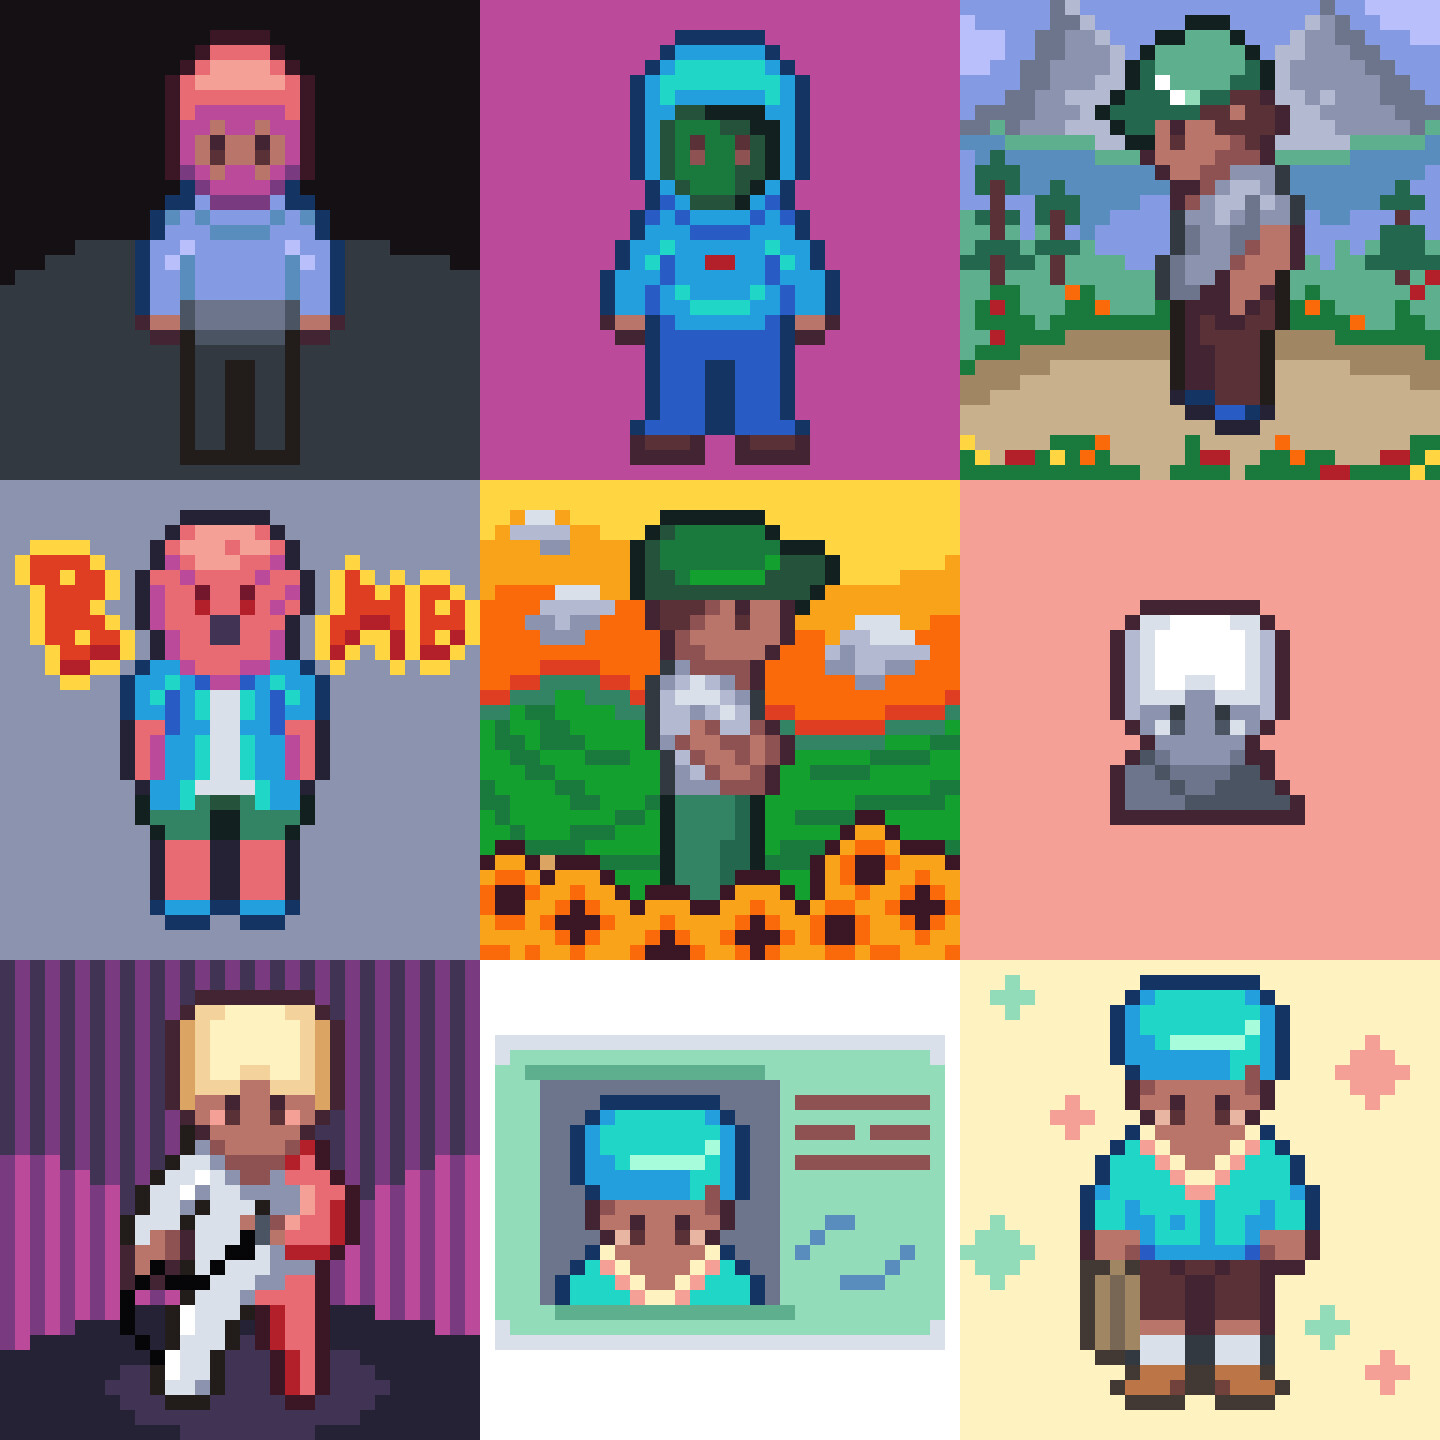 Every Tyler, the Creator album cover in the style of every Tyler